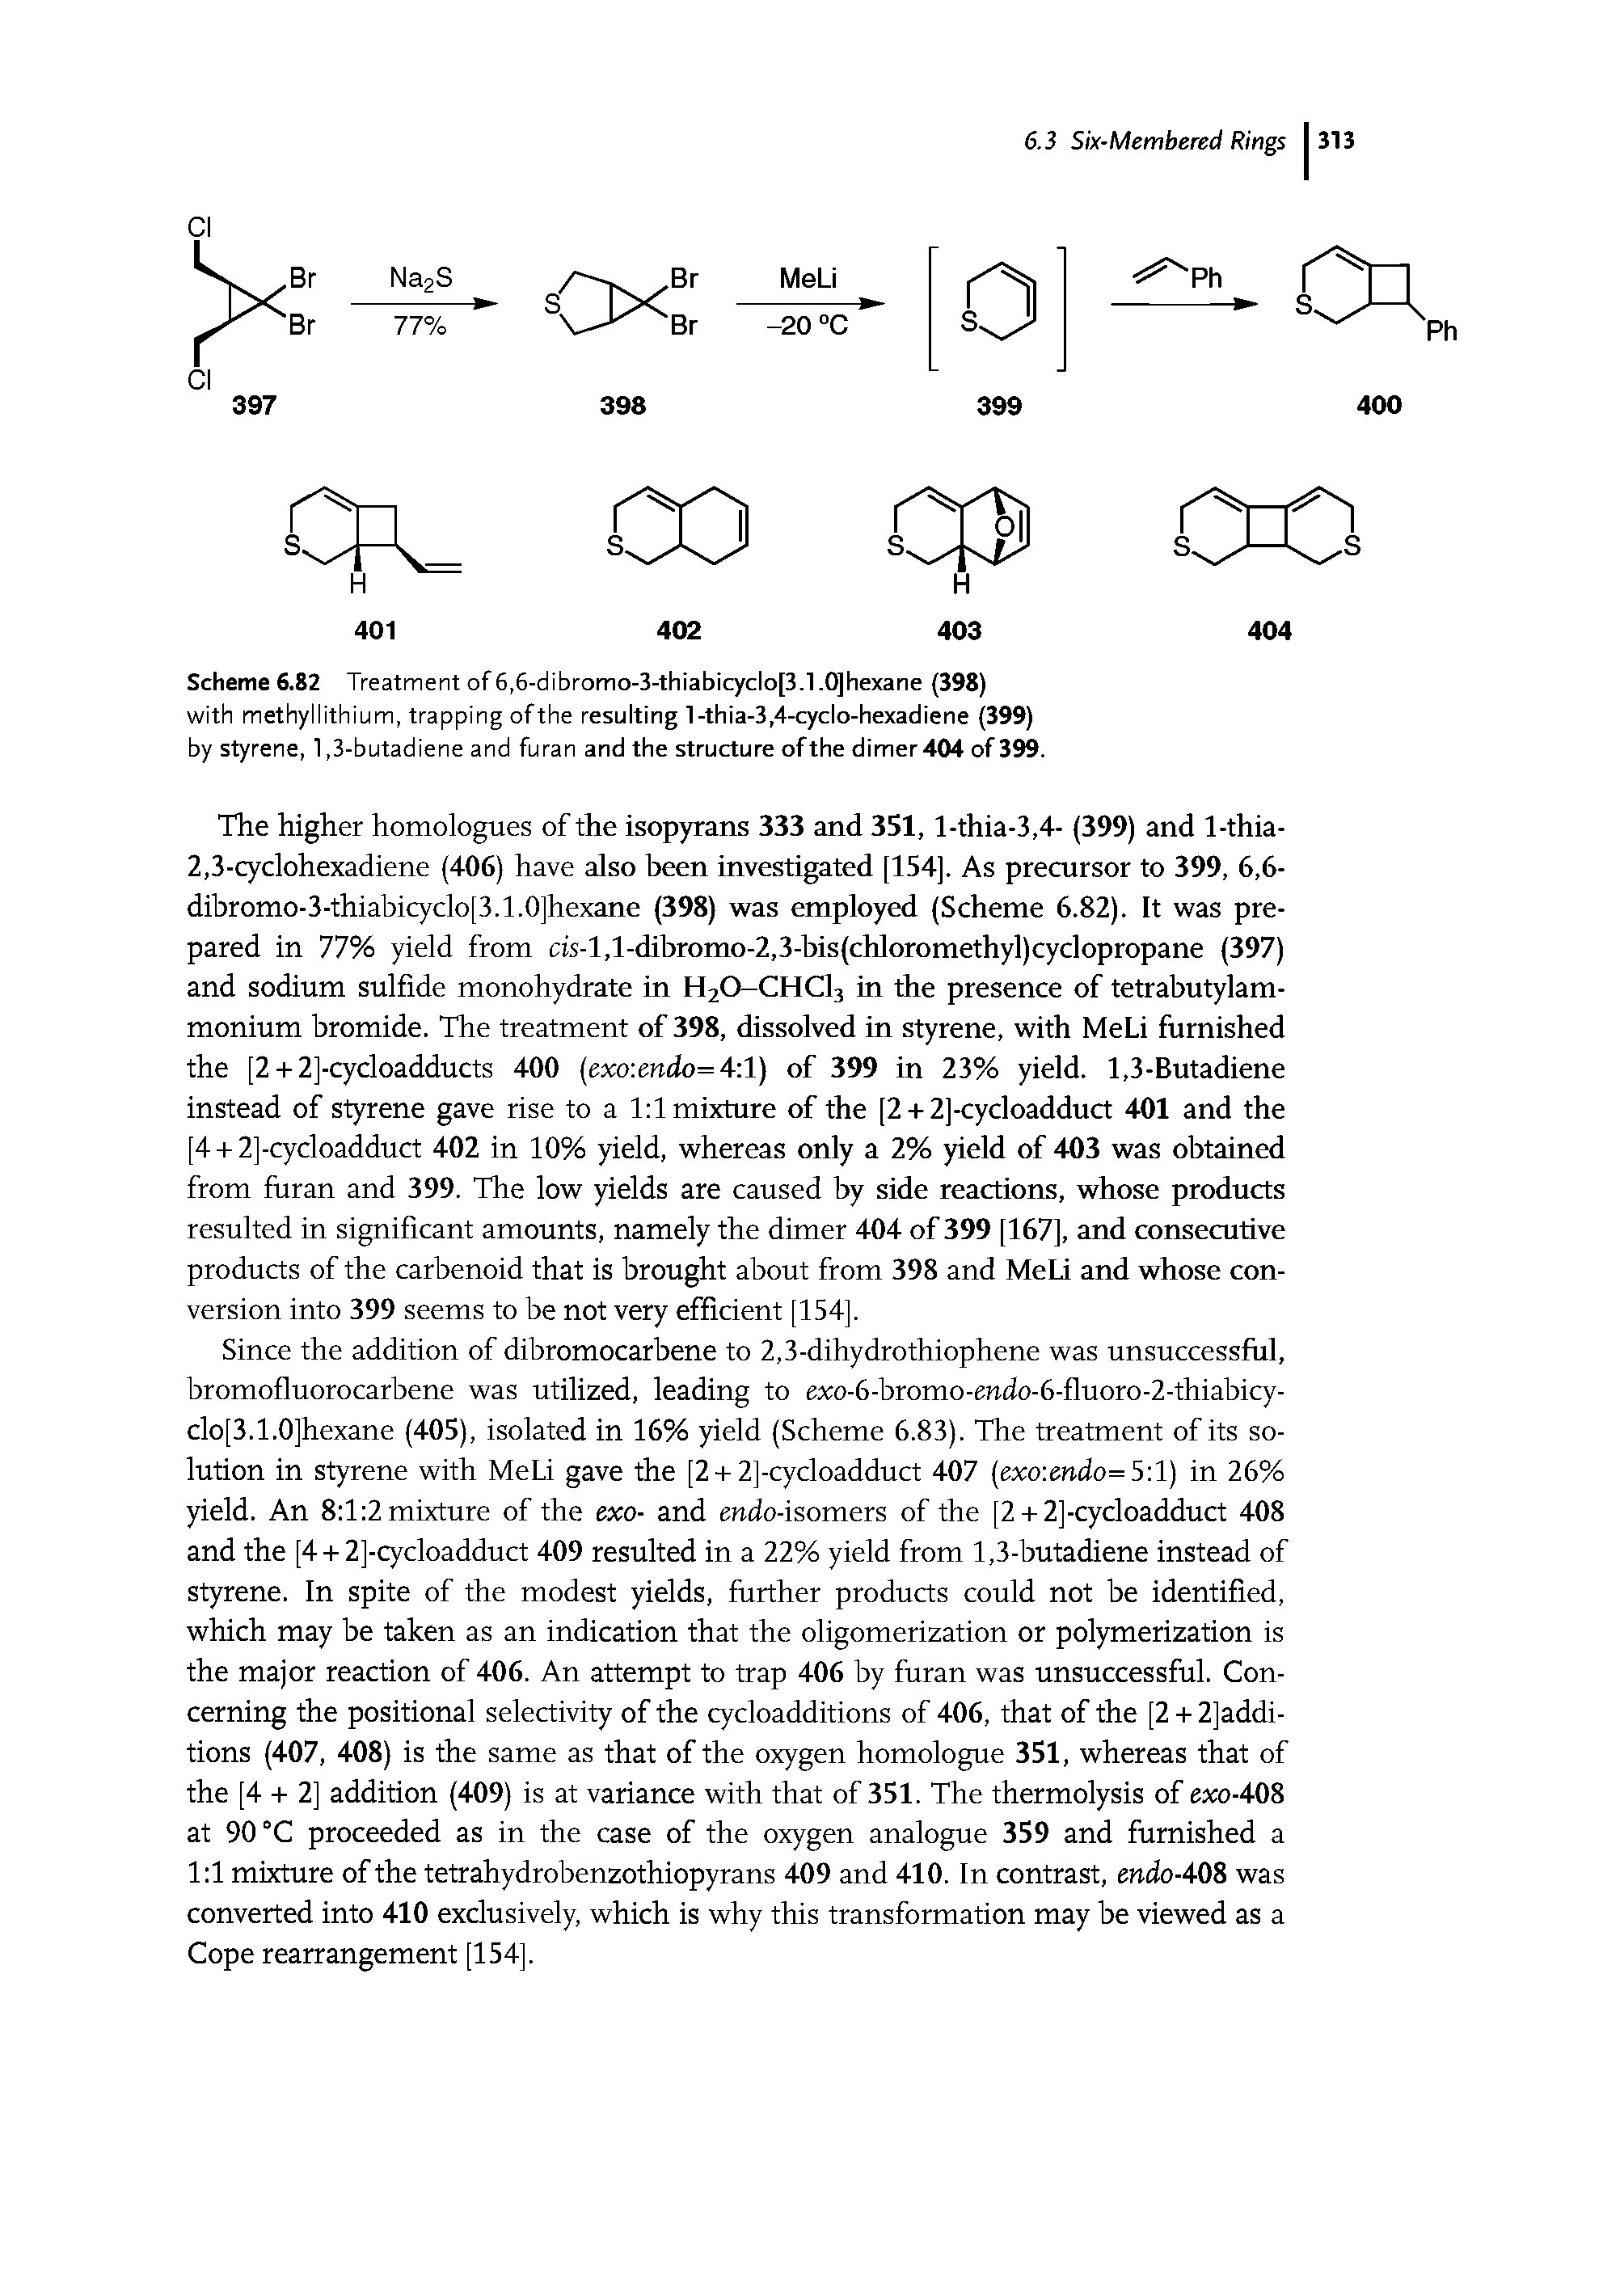 Scheme 6.82 Treatment of 6,6-dibromo-3-thiabicyclo[3.1.0]hexane (398) with methyllithium, trapping ofthe resulting l-thia-3,4-cyclo-hexadiene (399) by styrene, 1,3-butadiene and furan and the structure ofthe dimer404 of 399.